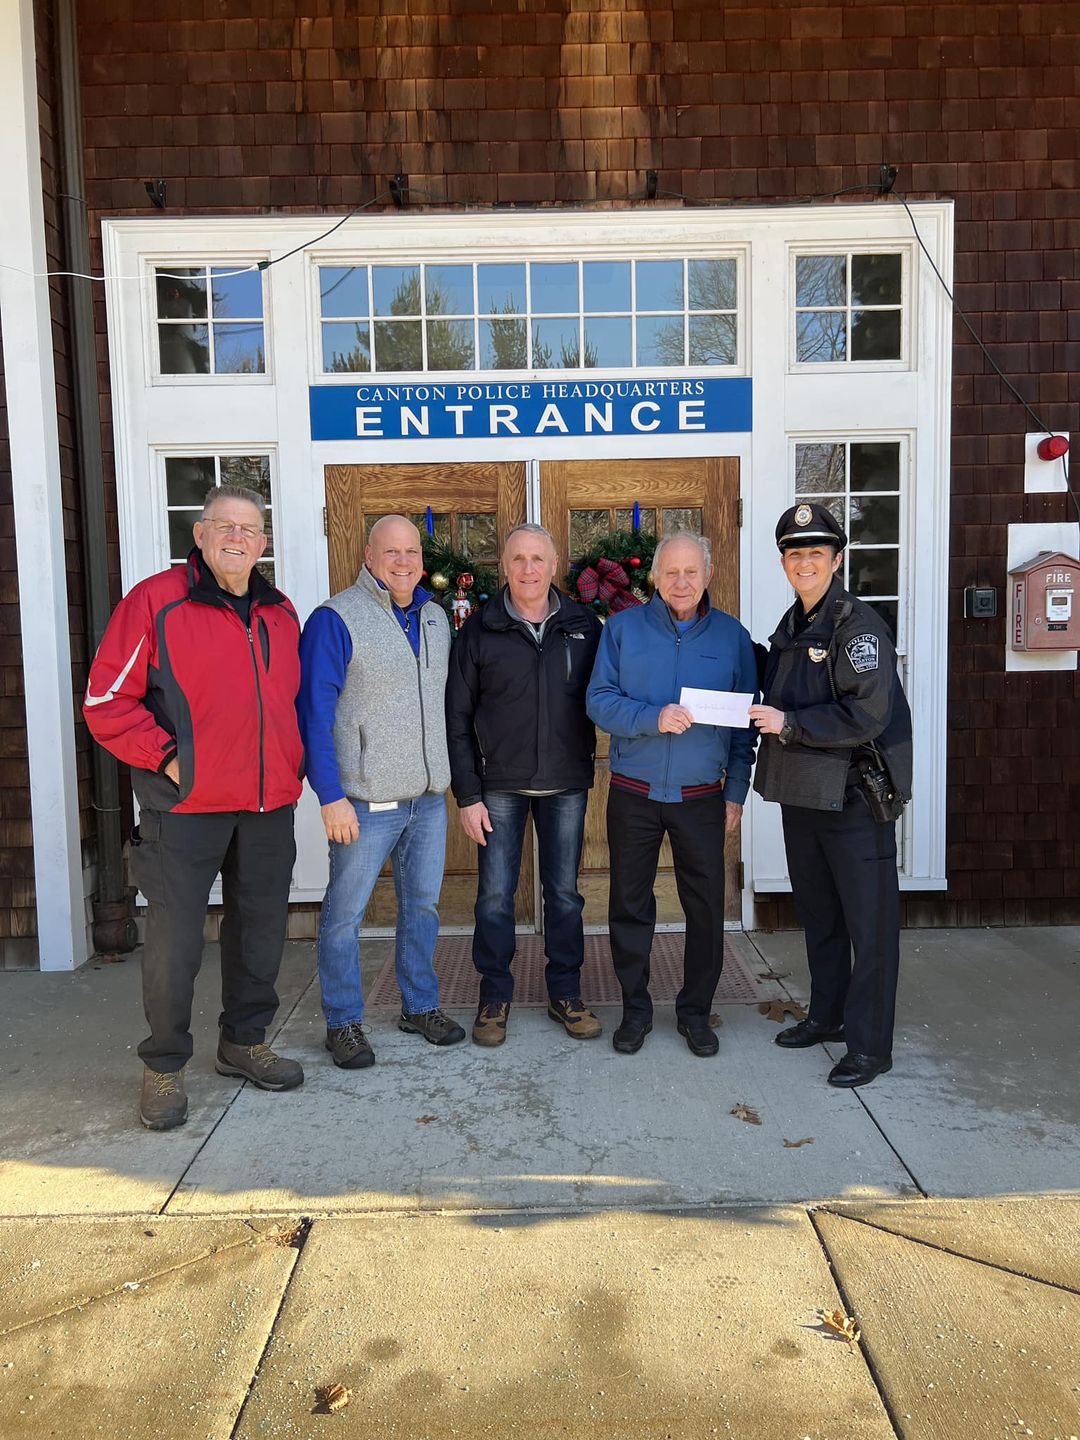 Retired Assoc. of Metro Police (RAMP) presented at $5,000 donation to CFKWC